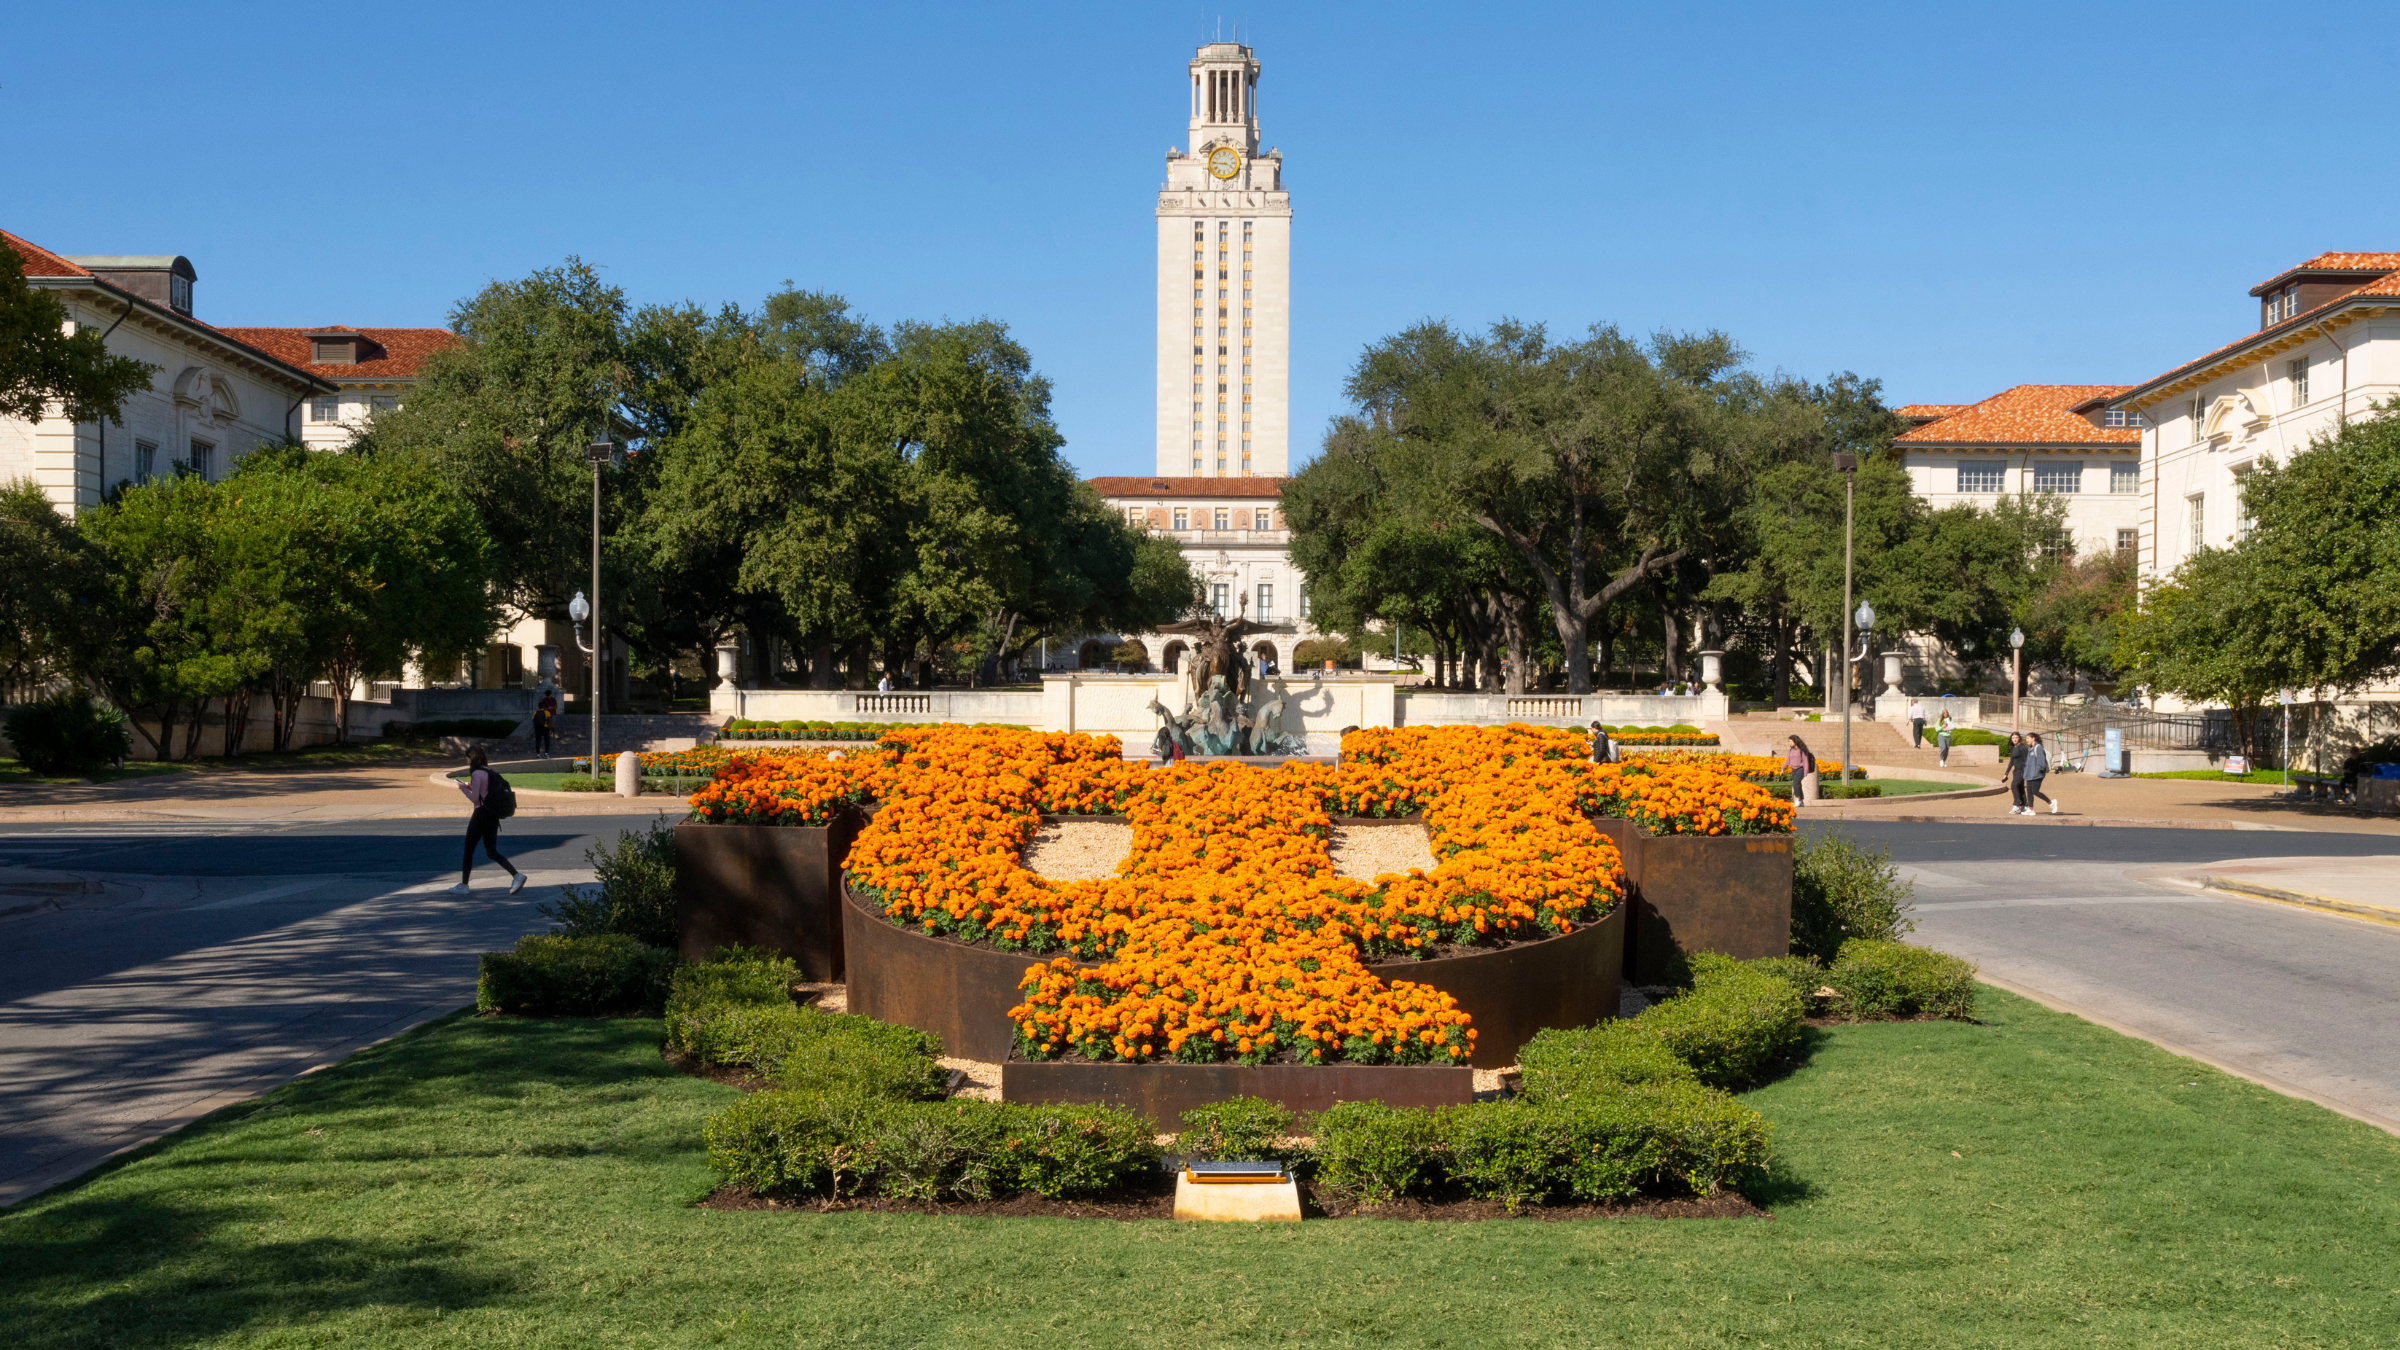 The University of Texas at Austin Tower is shown on a clear day with the Littlefield fountain and flowers that spell UT in the foreground